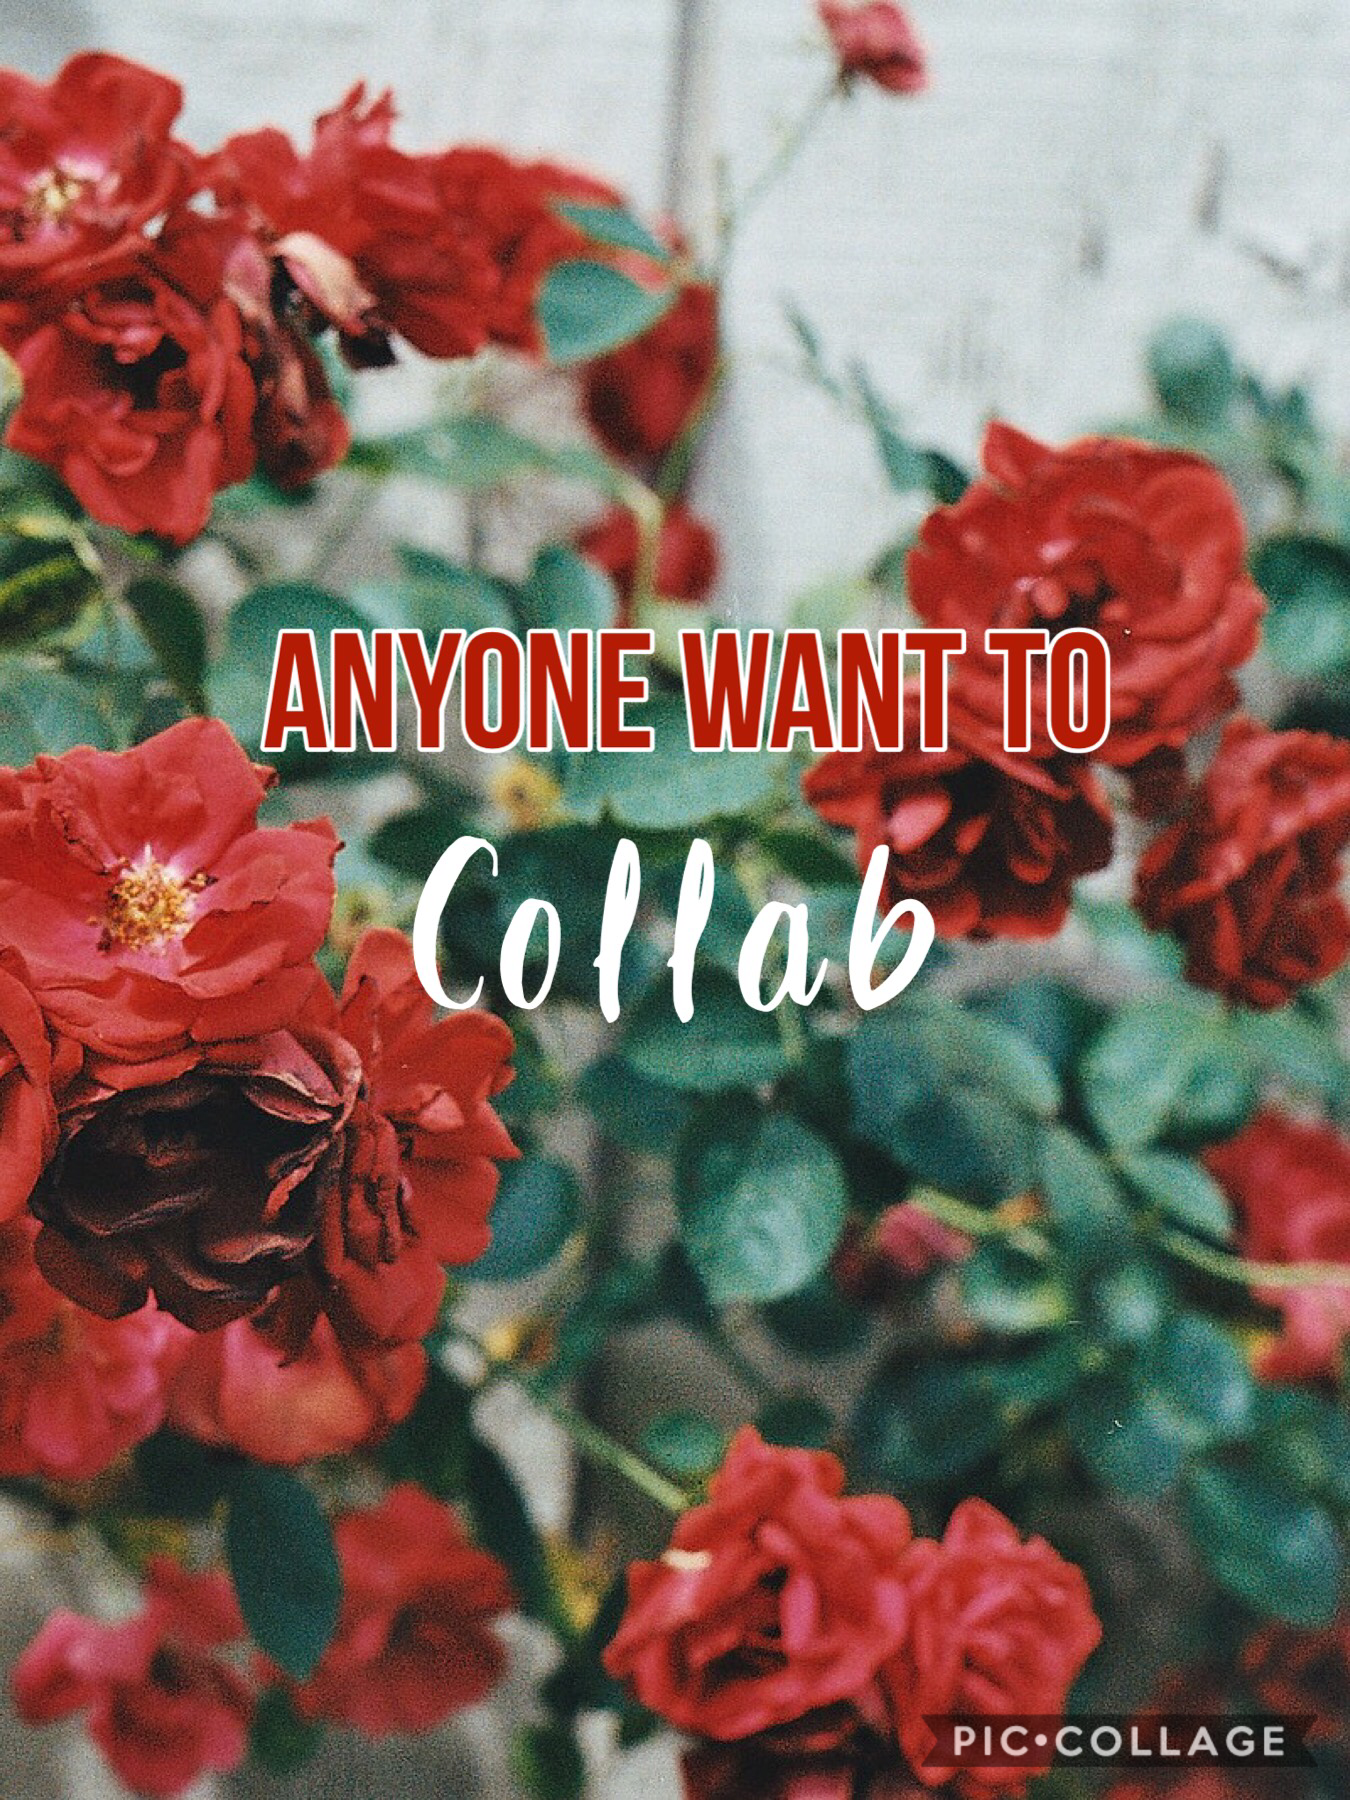 🥀Tap🥀
If u what to collab comment down below I like any style 💛🌻💕🌊🌴